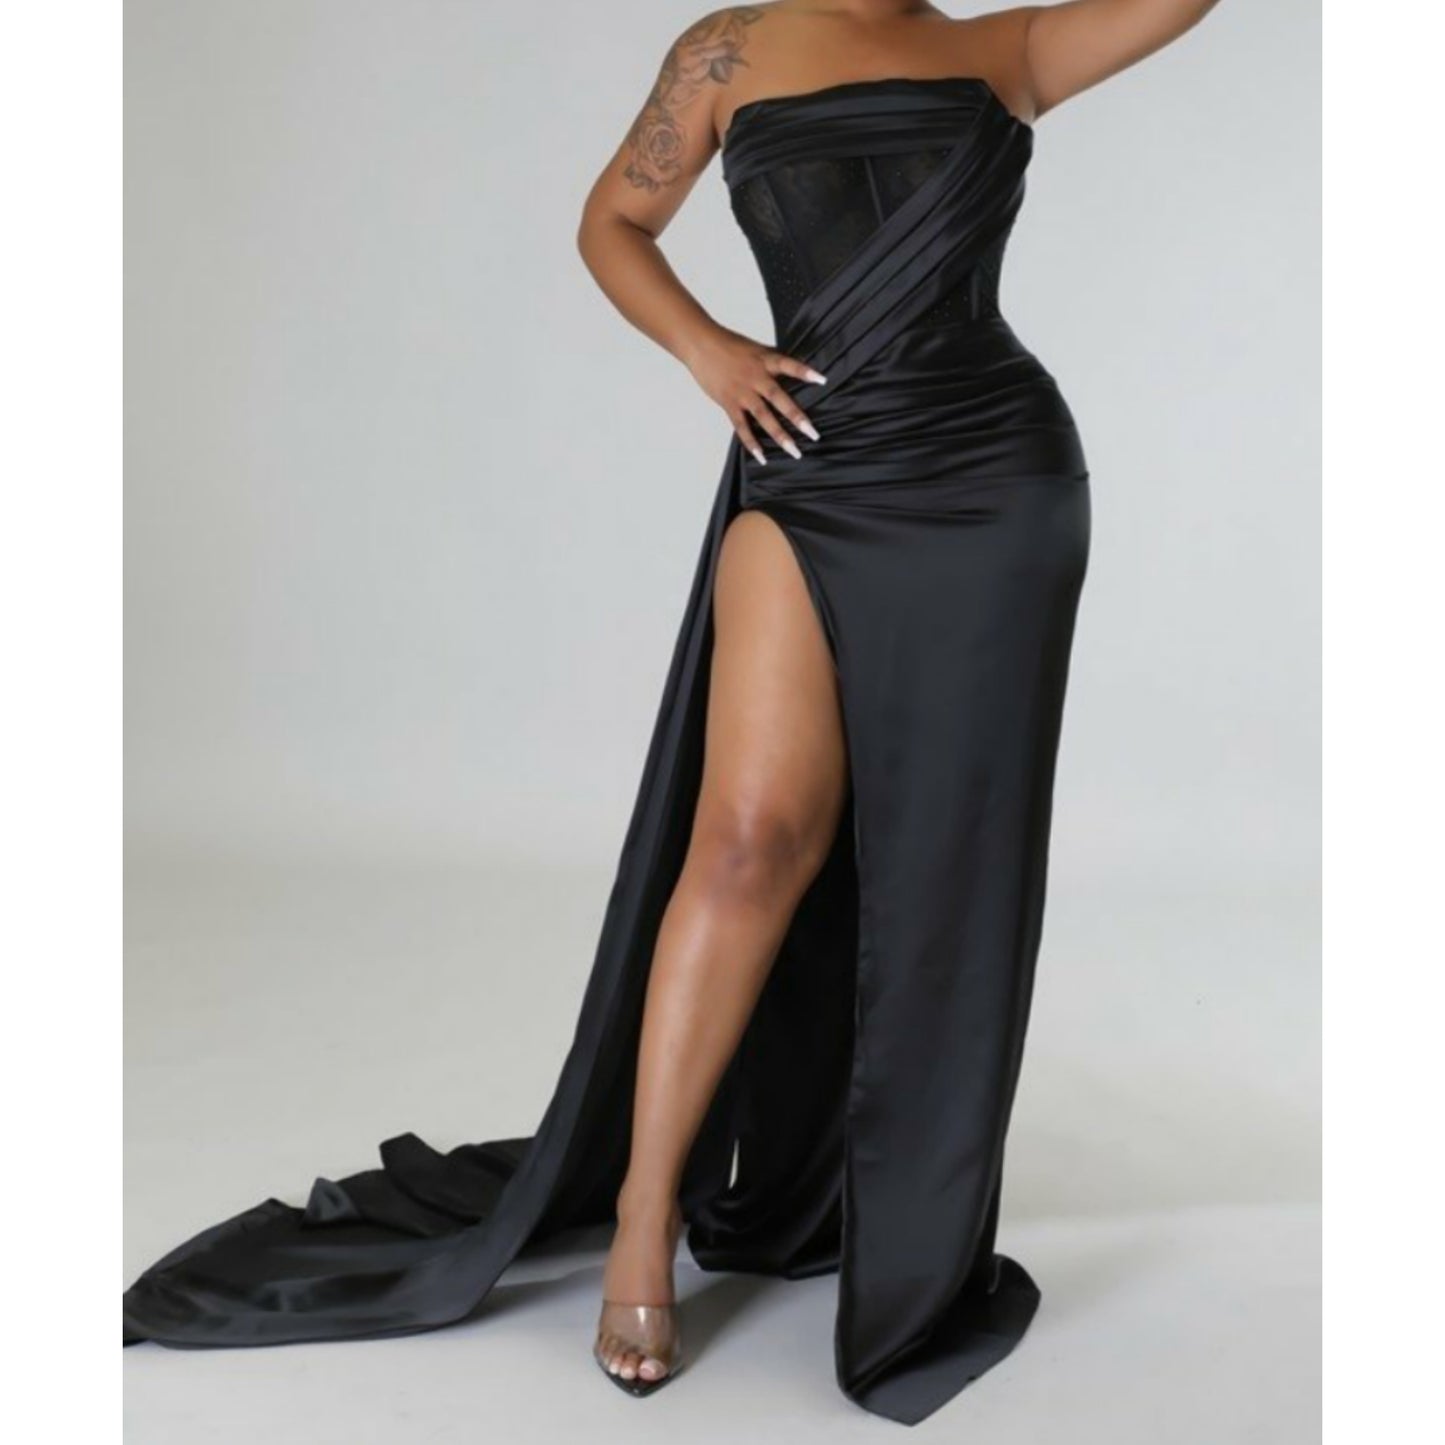 Main Stage Gown (Small - XL)